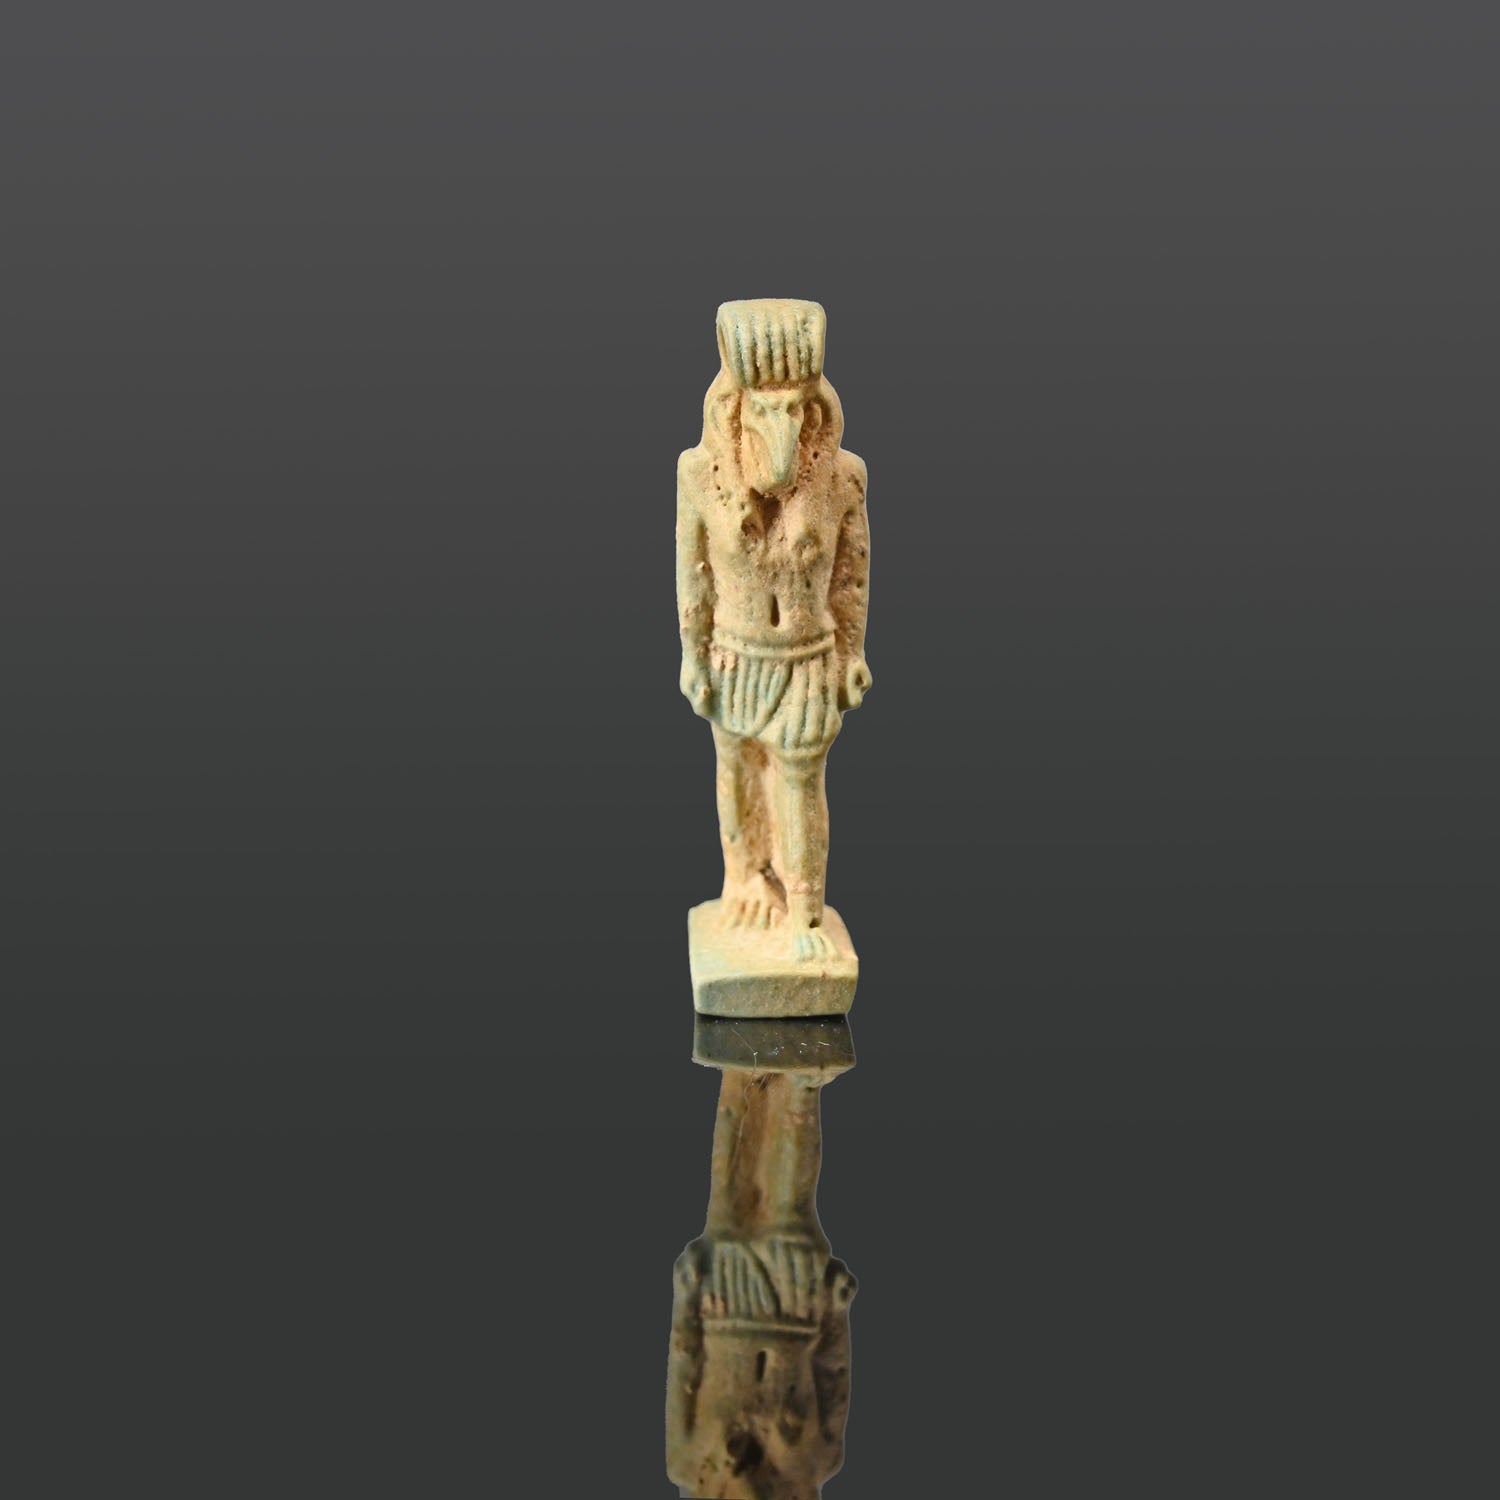 An Egyptian Faience Amulet of Thoth, Late Period, ca. 664 - 332 BCE